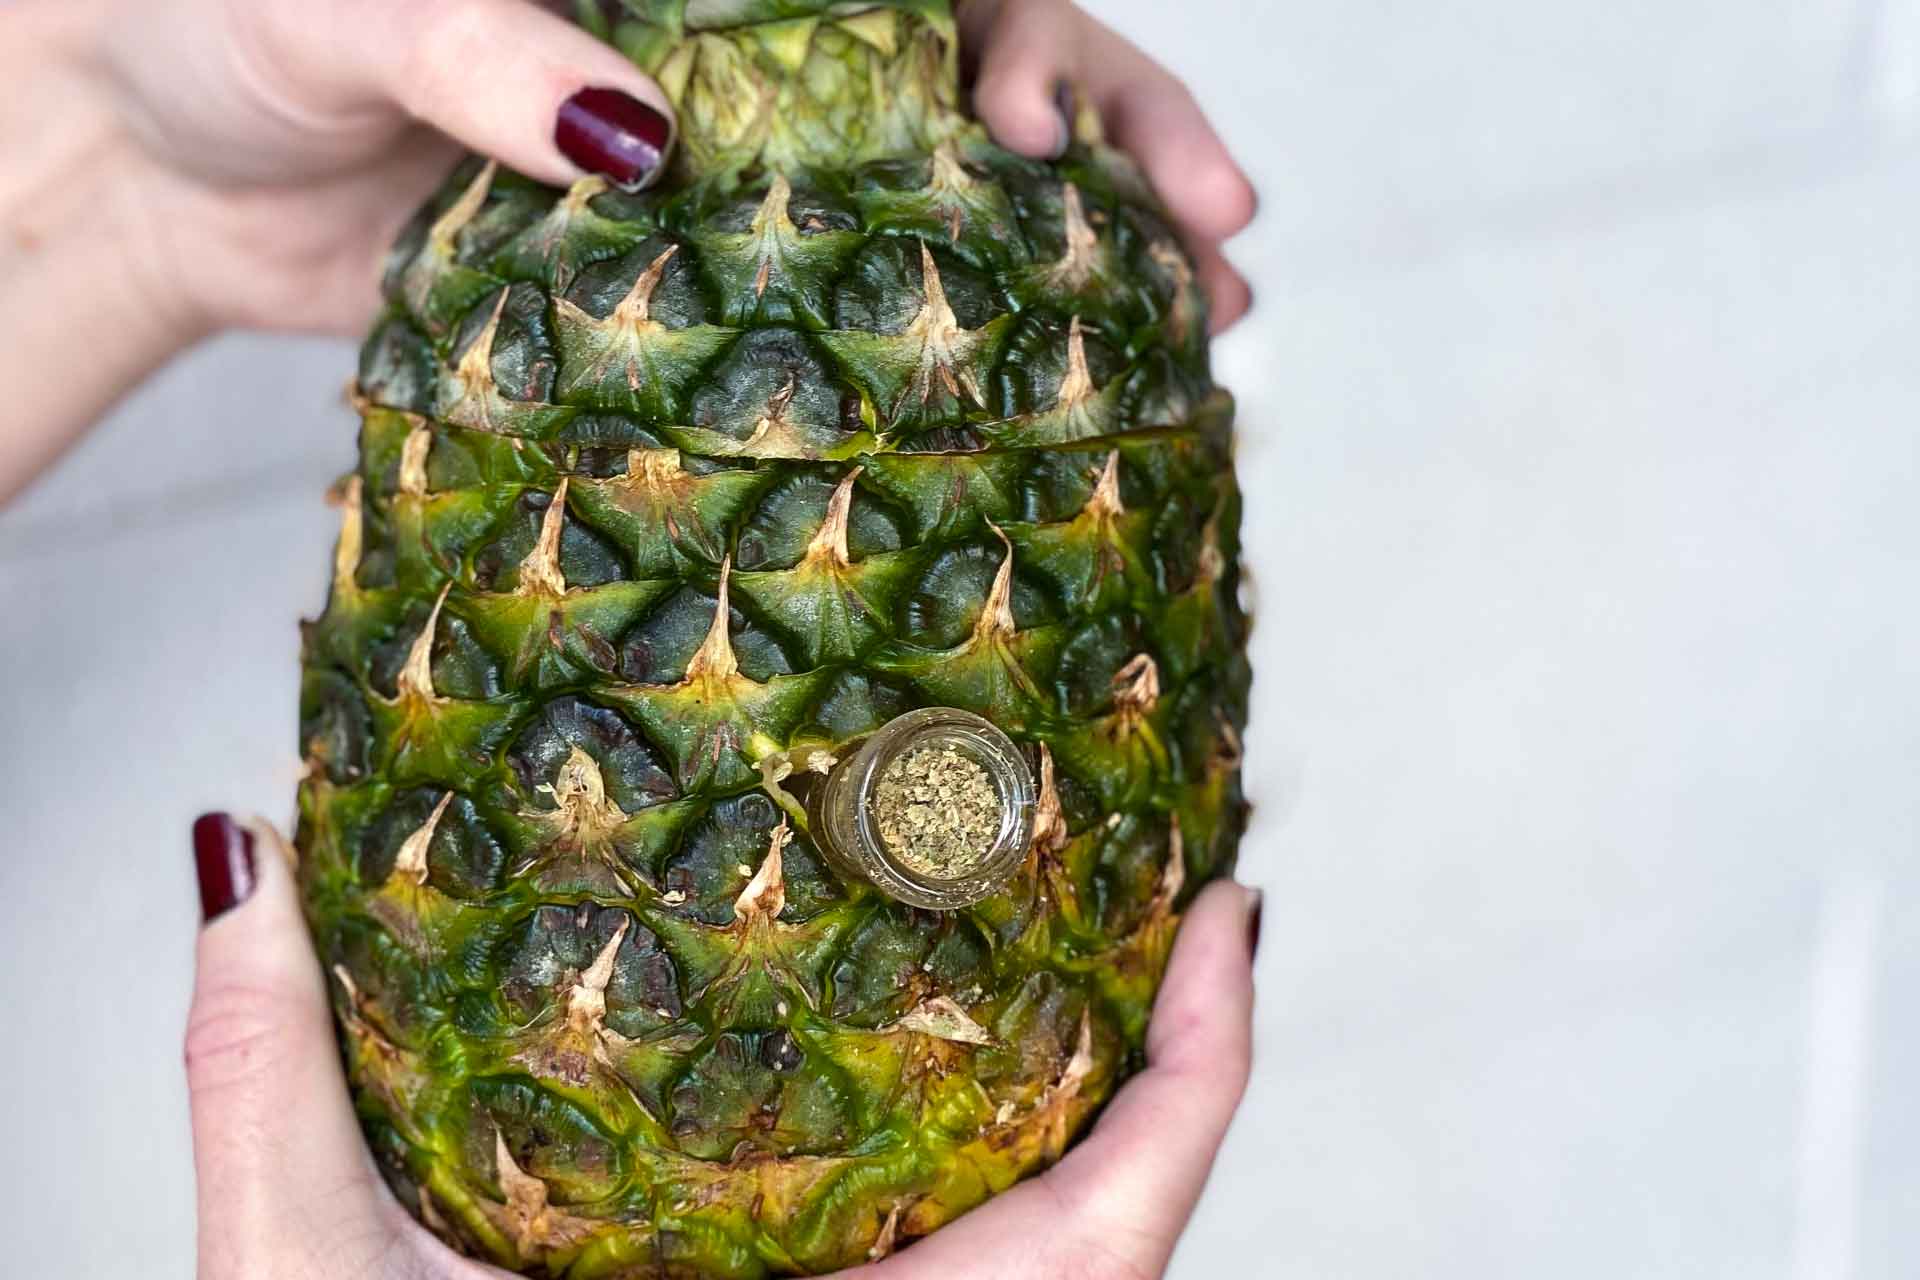 Hand Holding A Cannabis Bubbler Pipe made out of a pineapple